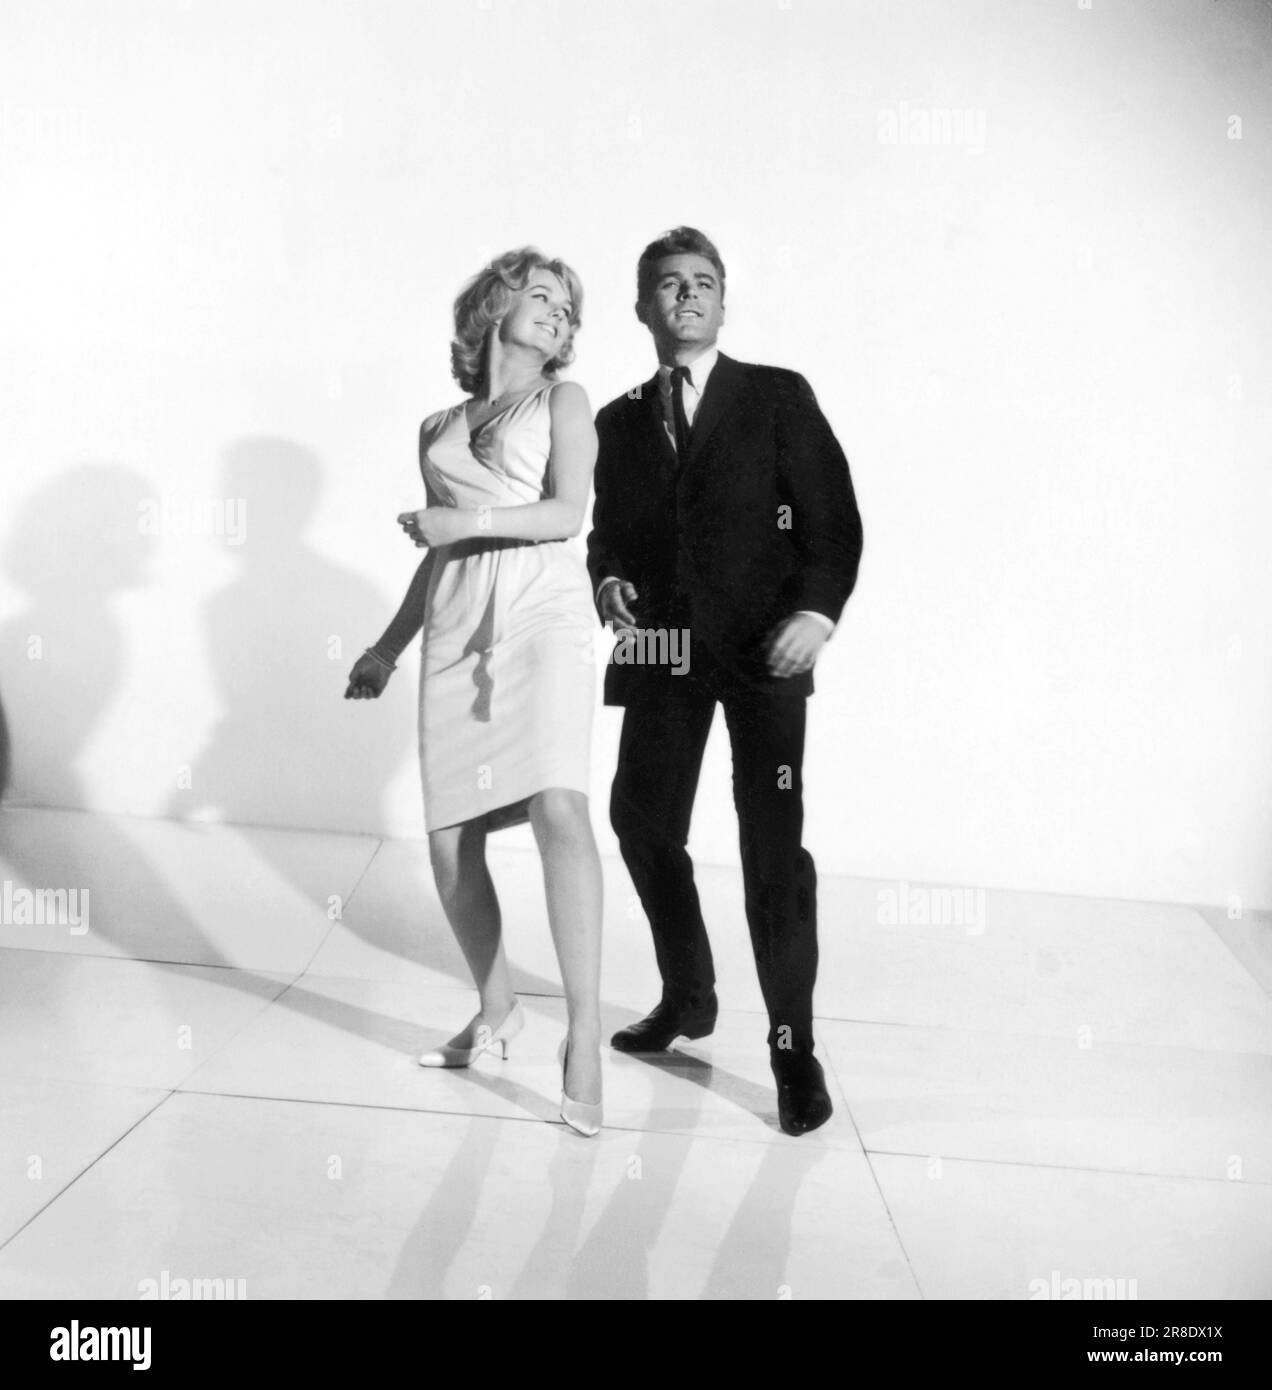 United States:  c. 1961 A photograph of a couple demonstrating how to dance the twist. Stock Photo